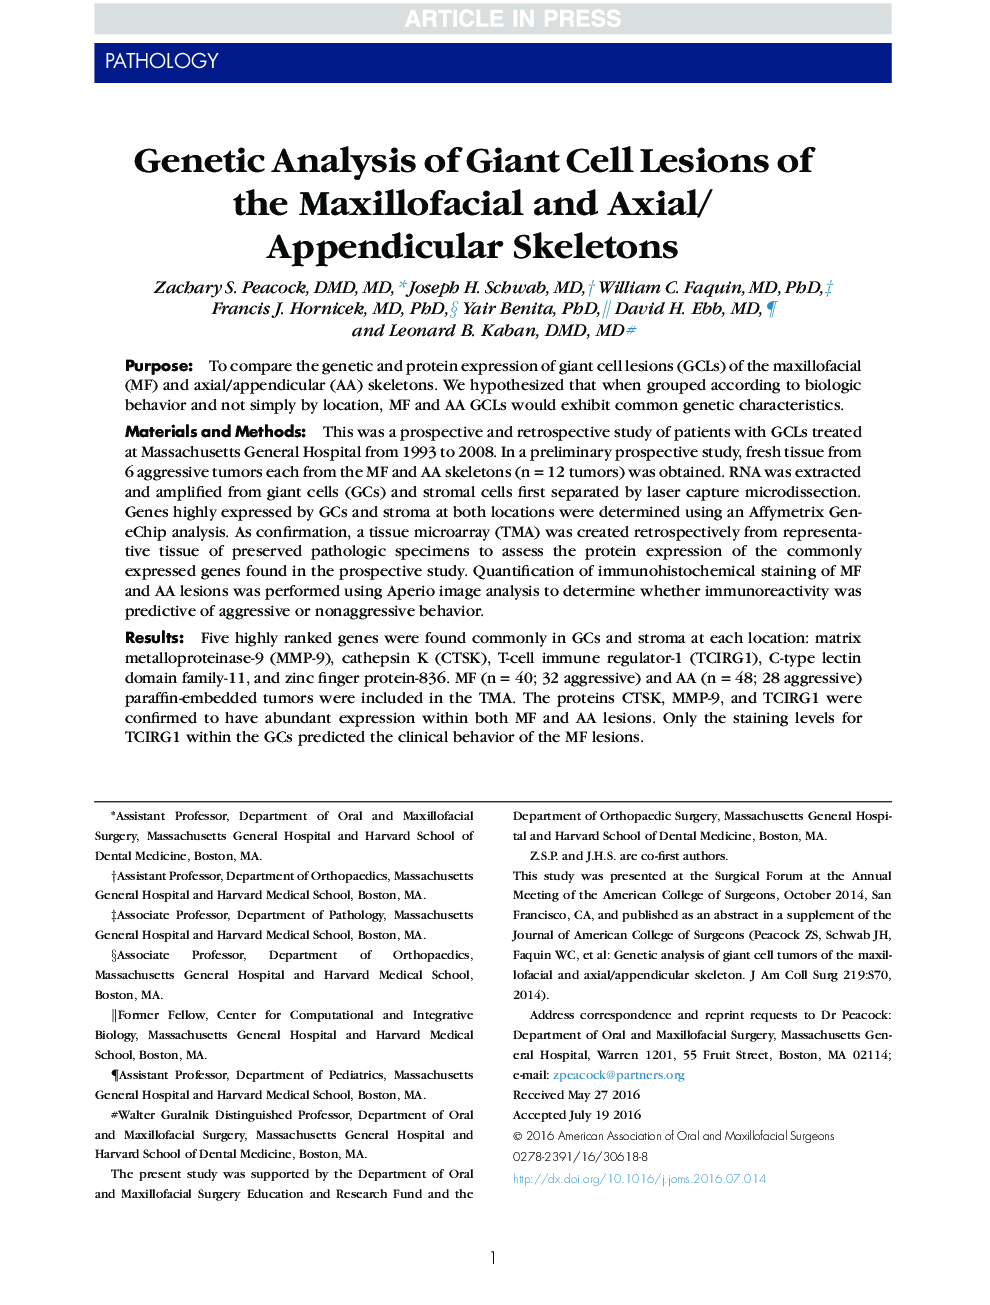 Genetic Analysis of Giant Cell Lesions of the Maxillofacial and Axial/Appendicular Skeletons